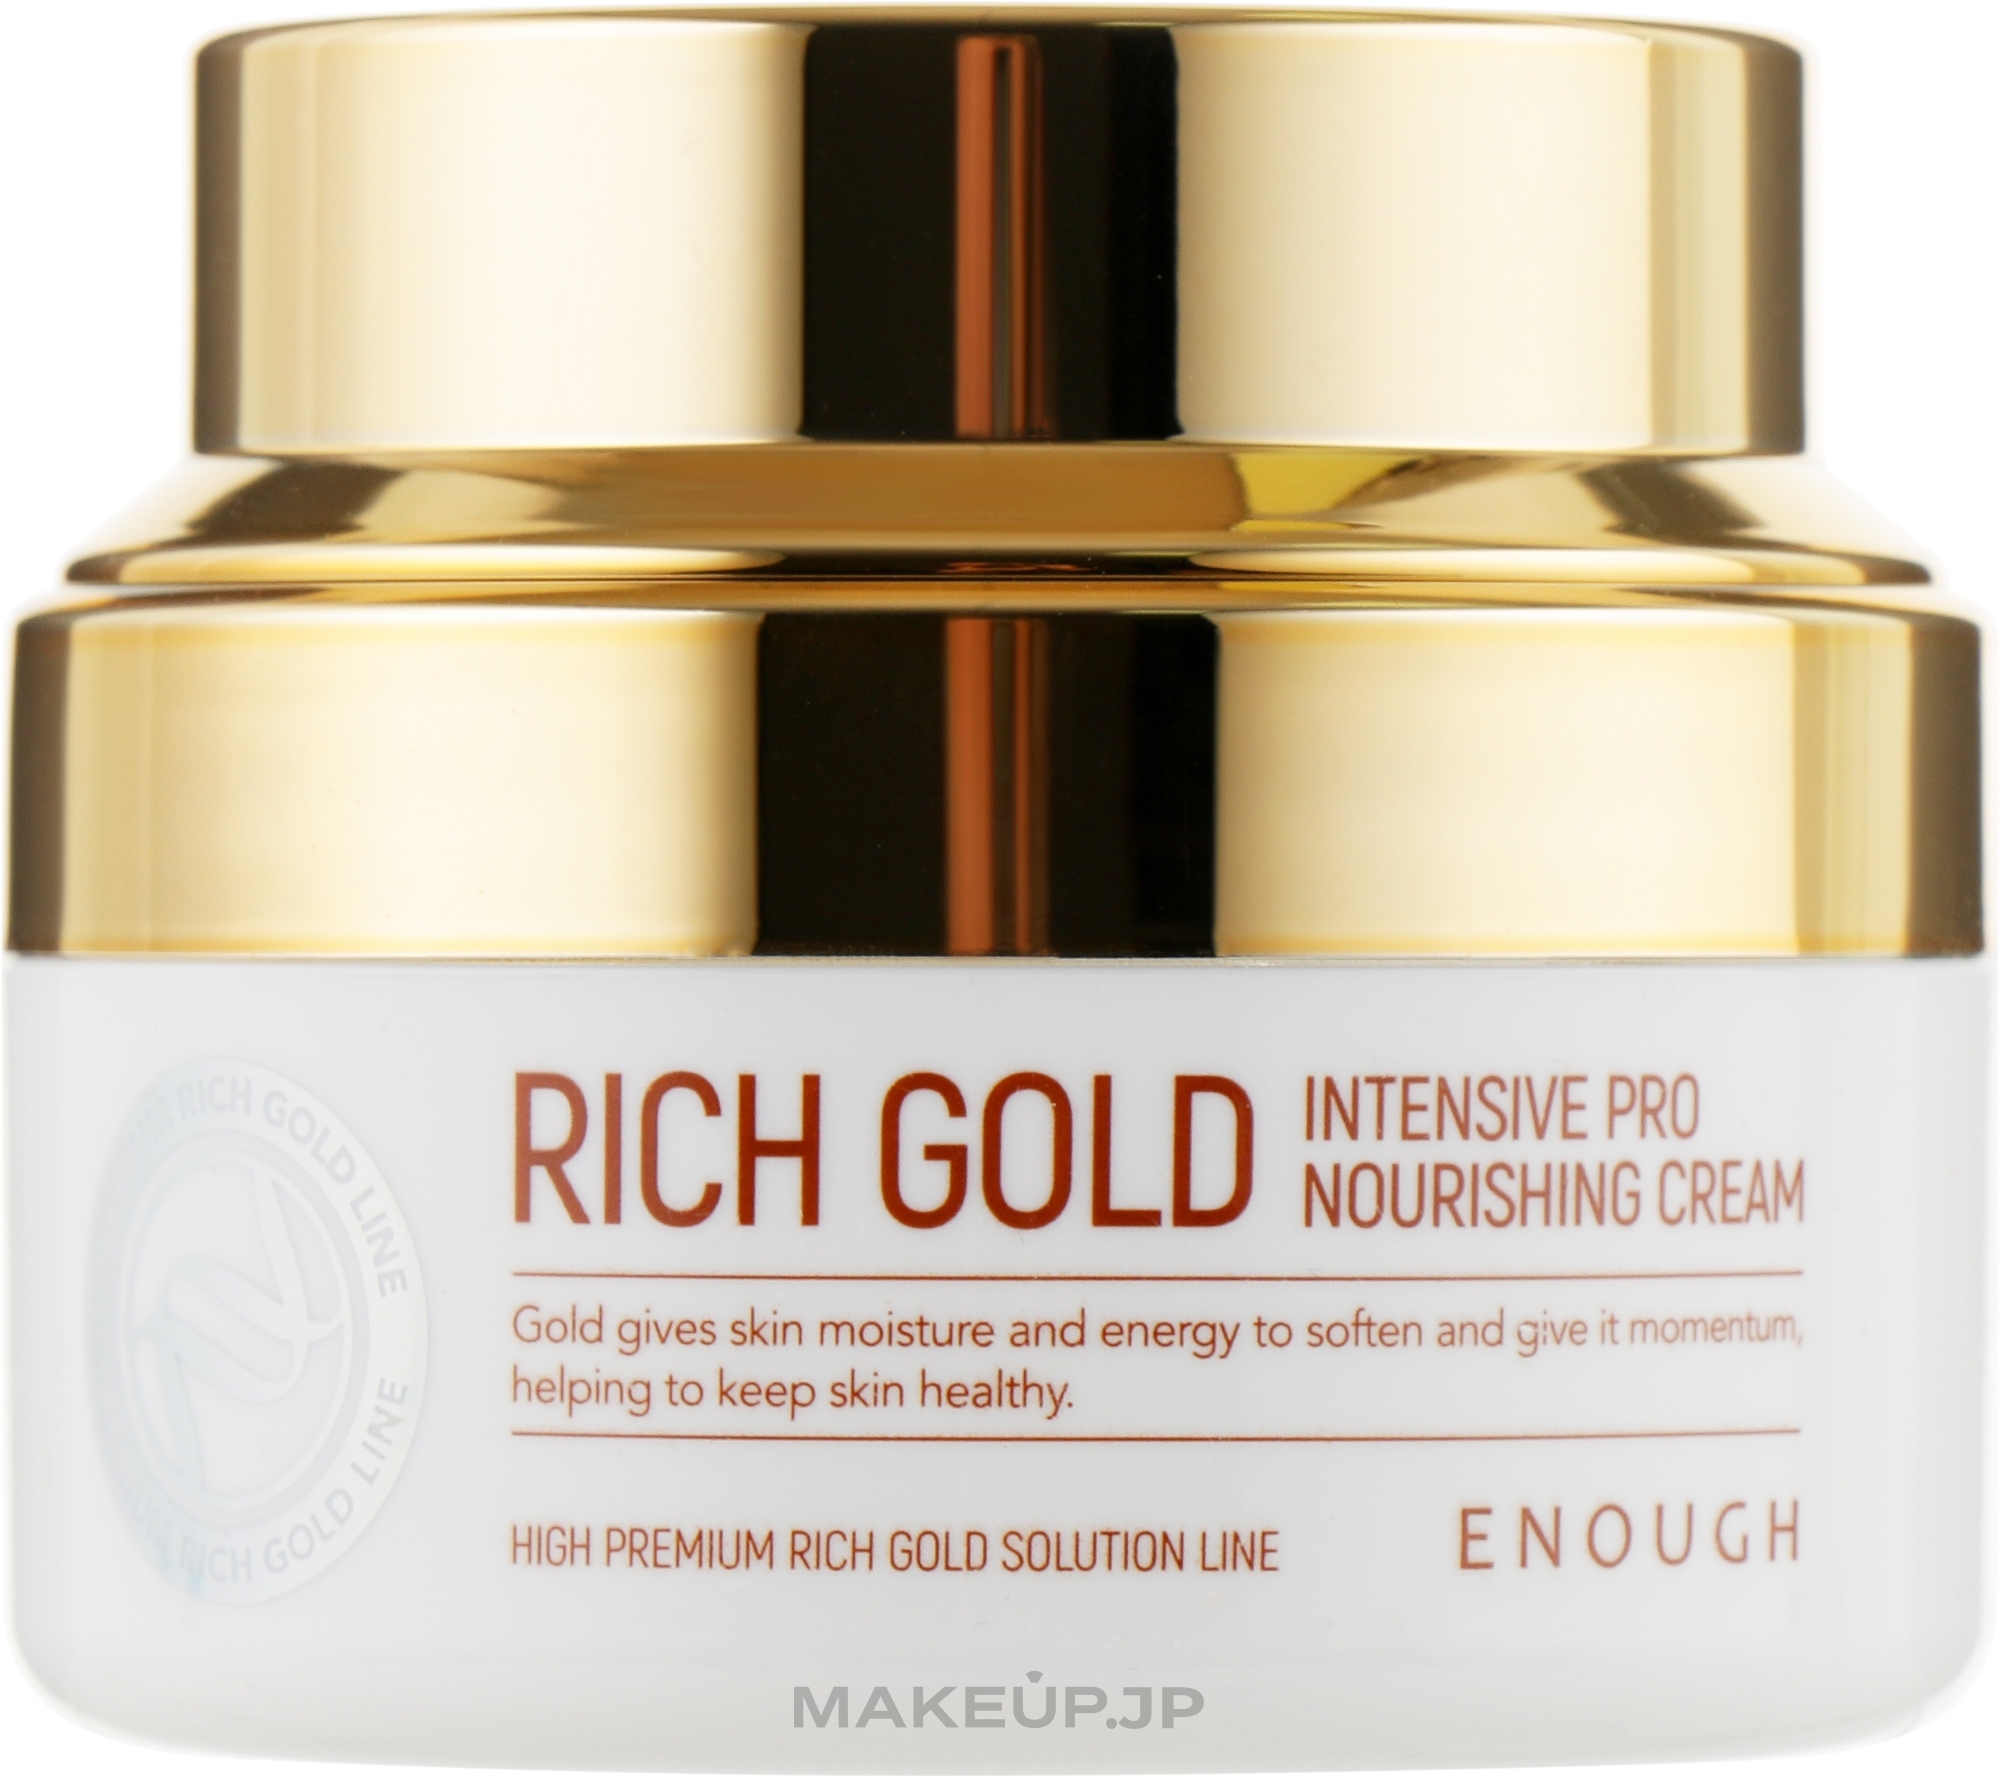 Intensive Nourishing Face Cream with Gold Ions - Enough Rich Gold Intensive Pro Nourishing Cream — photo 50 ml